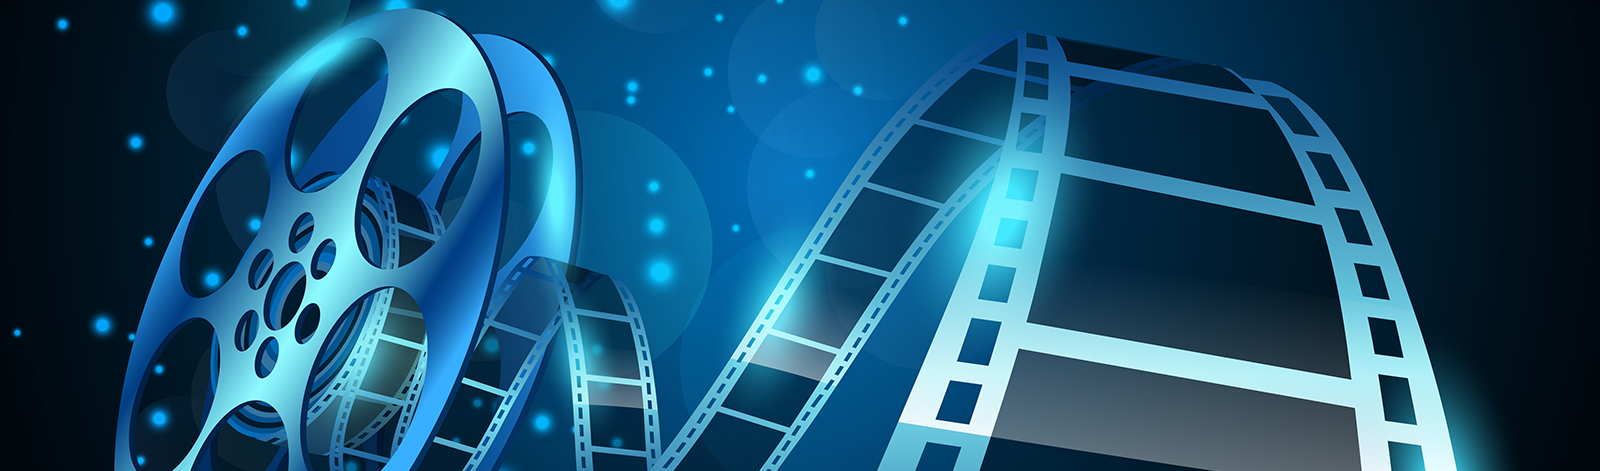 Illustration of film reel stripe on abstract background